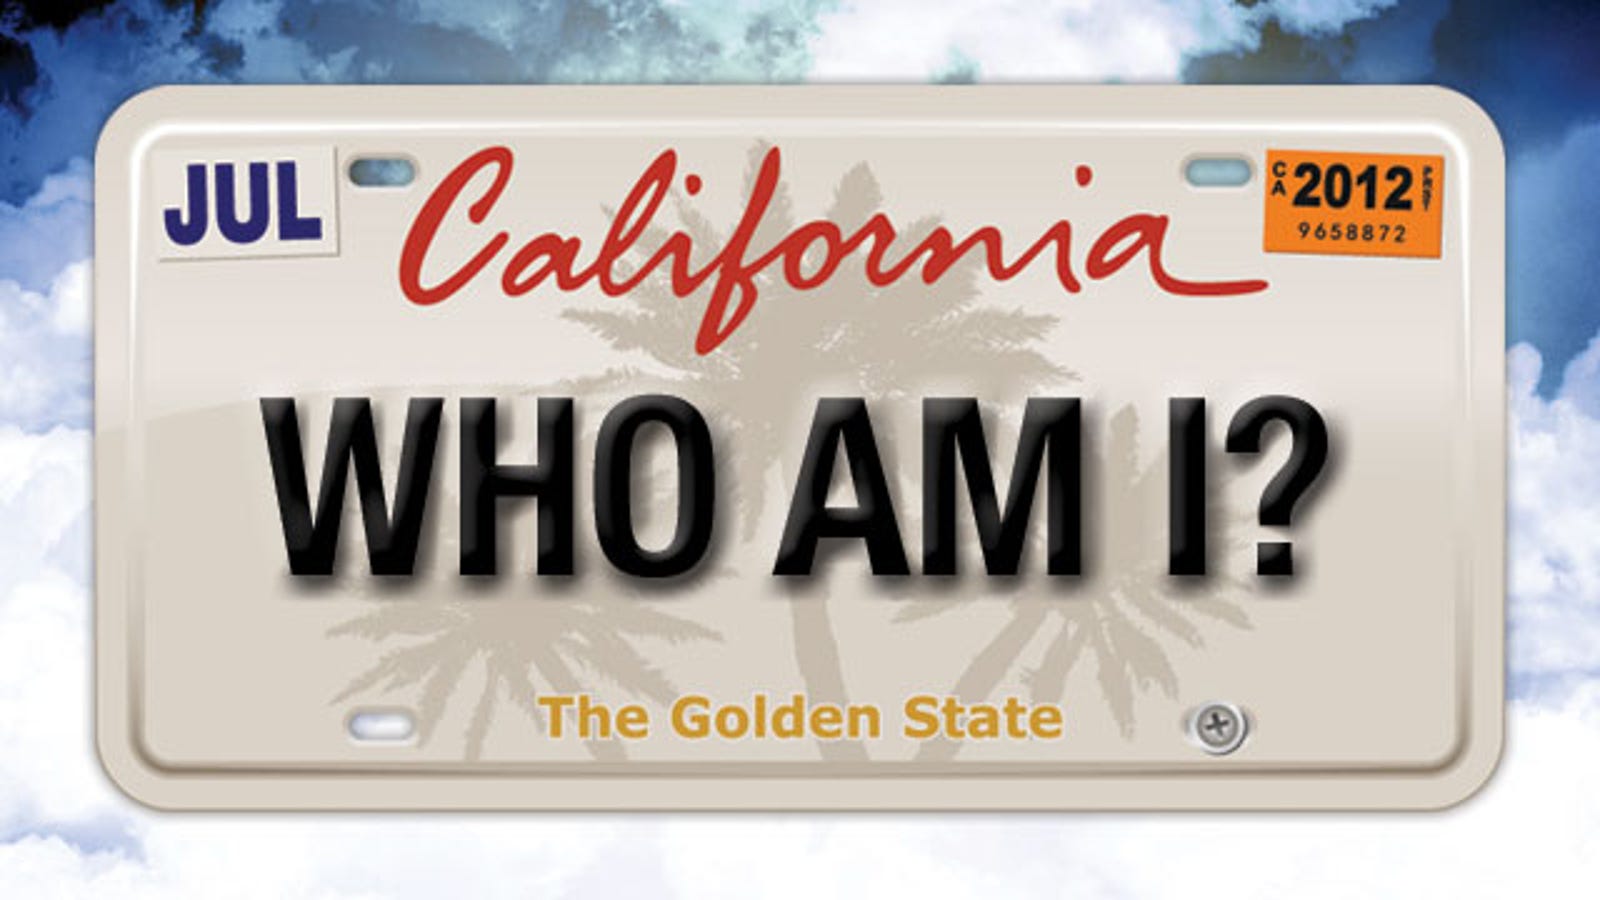 license plate number search